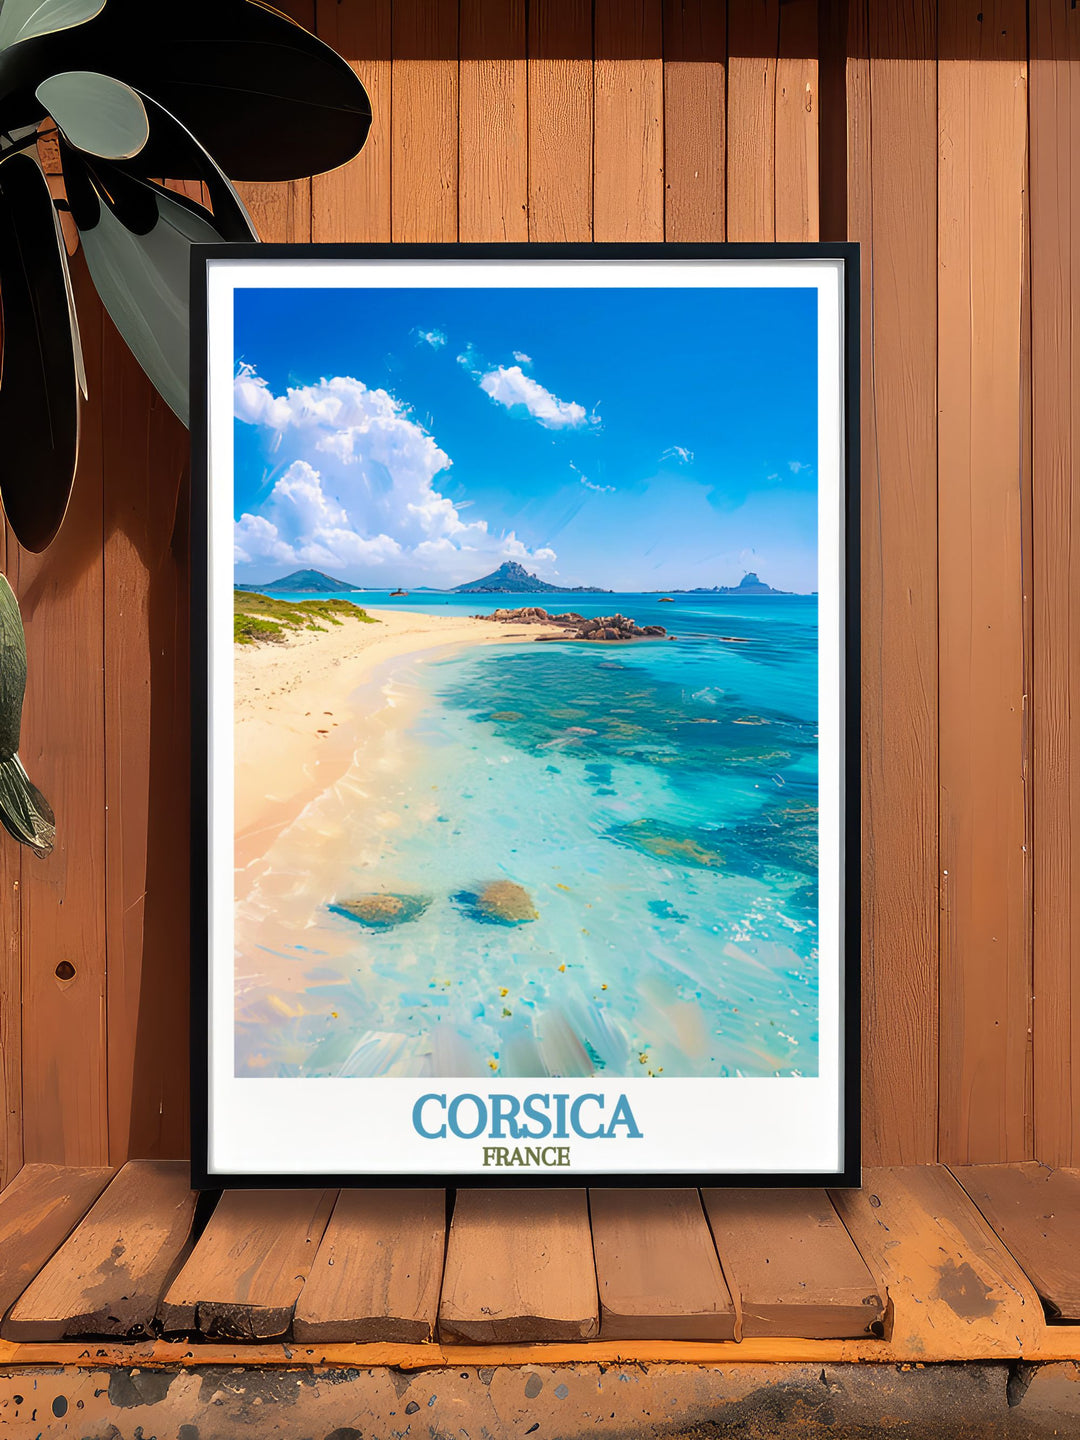 Beautifully crafted Lavezzi Islands framed print showcasing the stunning landscapes of Corsica France an ideal piece for any art collection perfect for enhancing your home decor with natural beauty